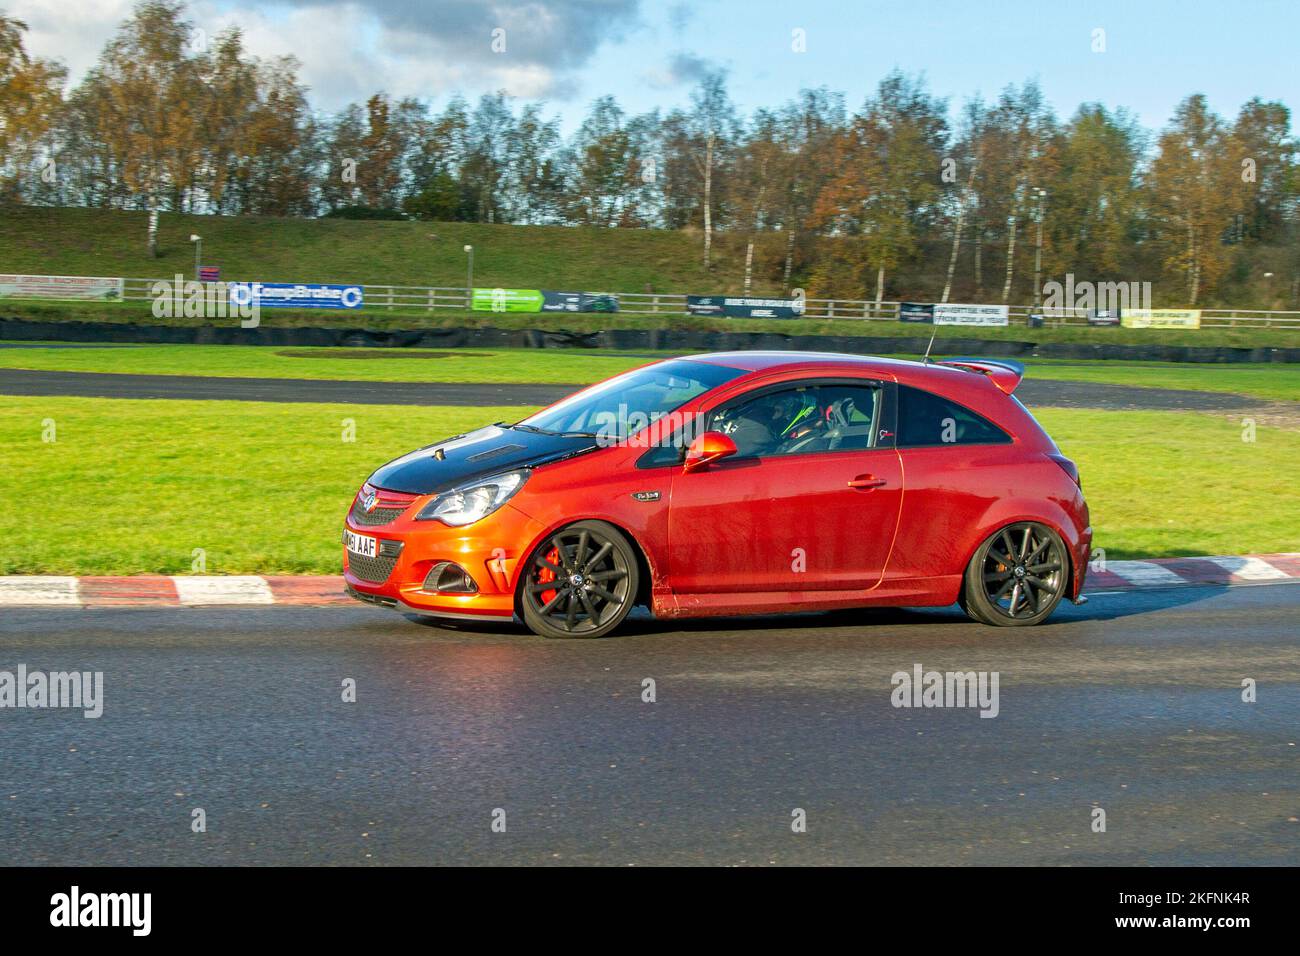 2012 Orange VAUXHALL CORSA VXR NURBURGRING EDITION 1598cc 6 speed manual; driving on challenging high-speed and technical low-geared corners of the Three sisters race circuit near Wigan, UK Stock Photo